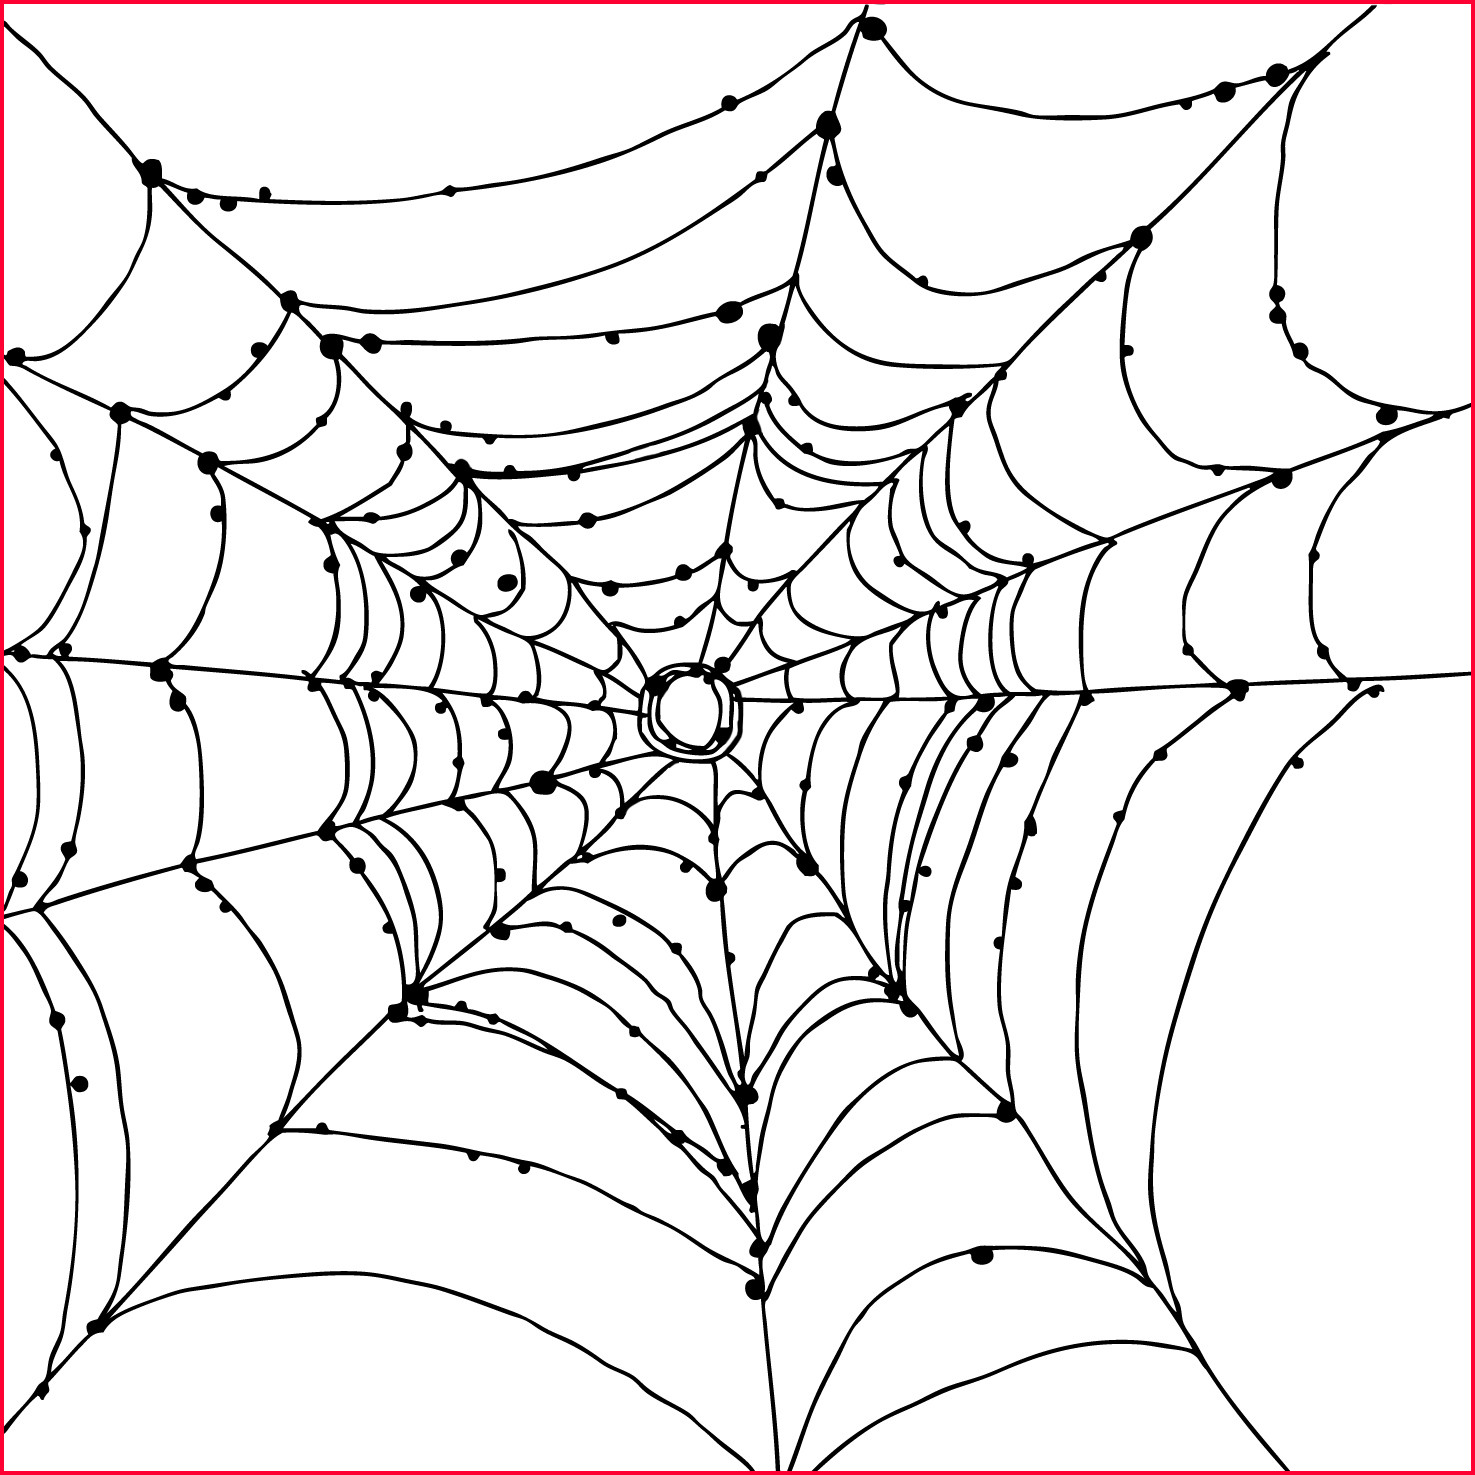 simple-spider-web-drawing-at-paintingvalley-explore-collection-of-simple-spider-web-drawing